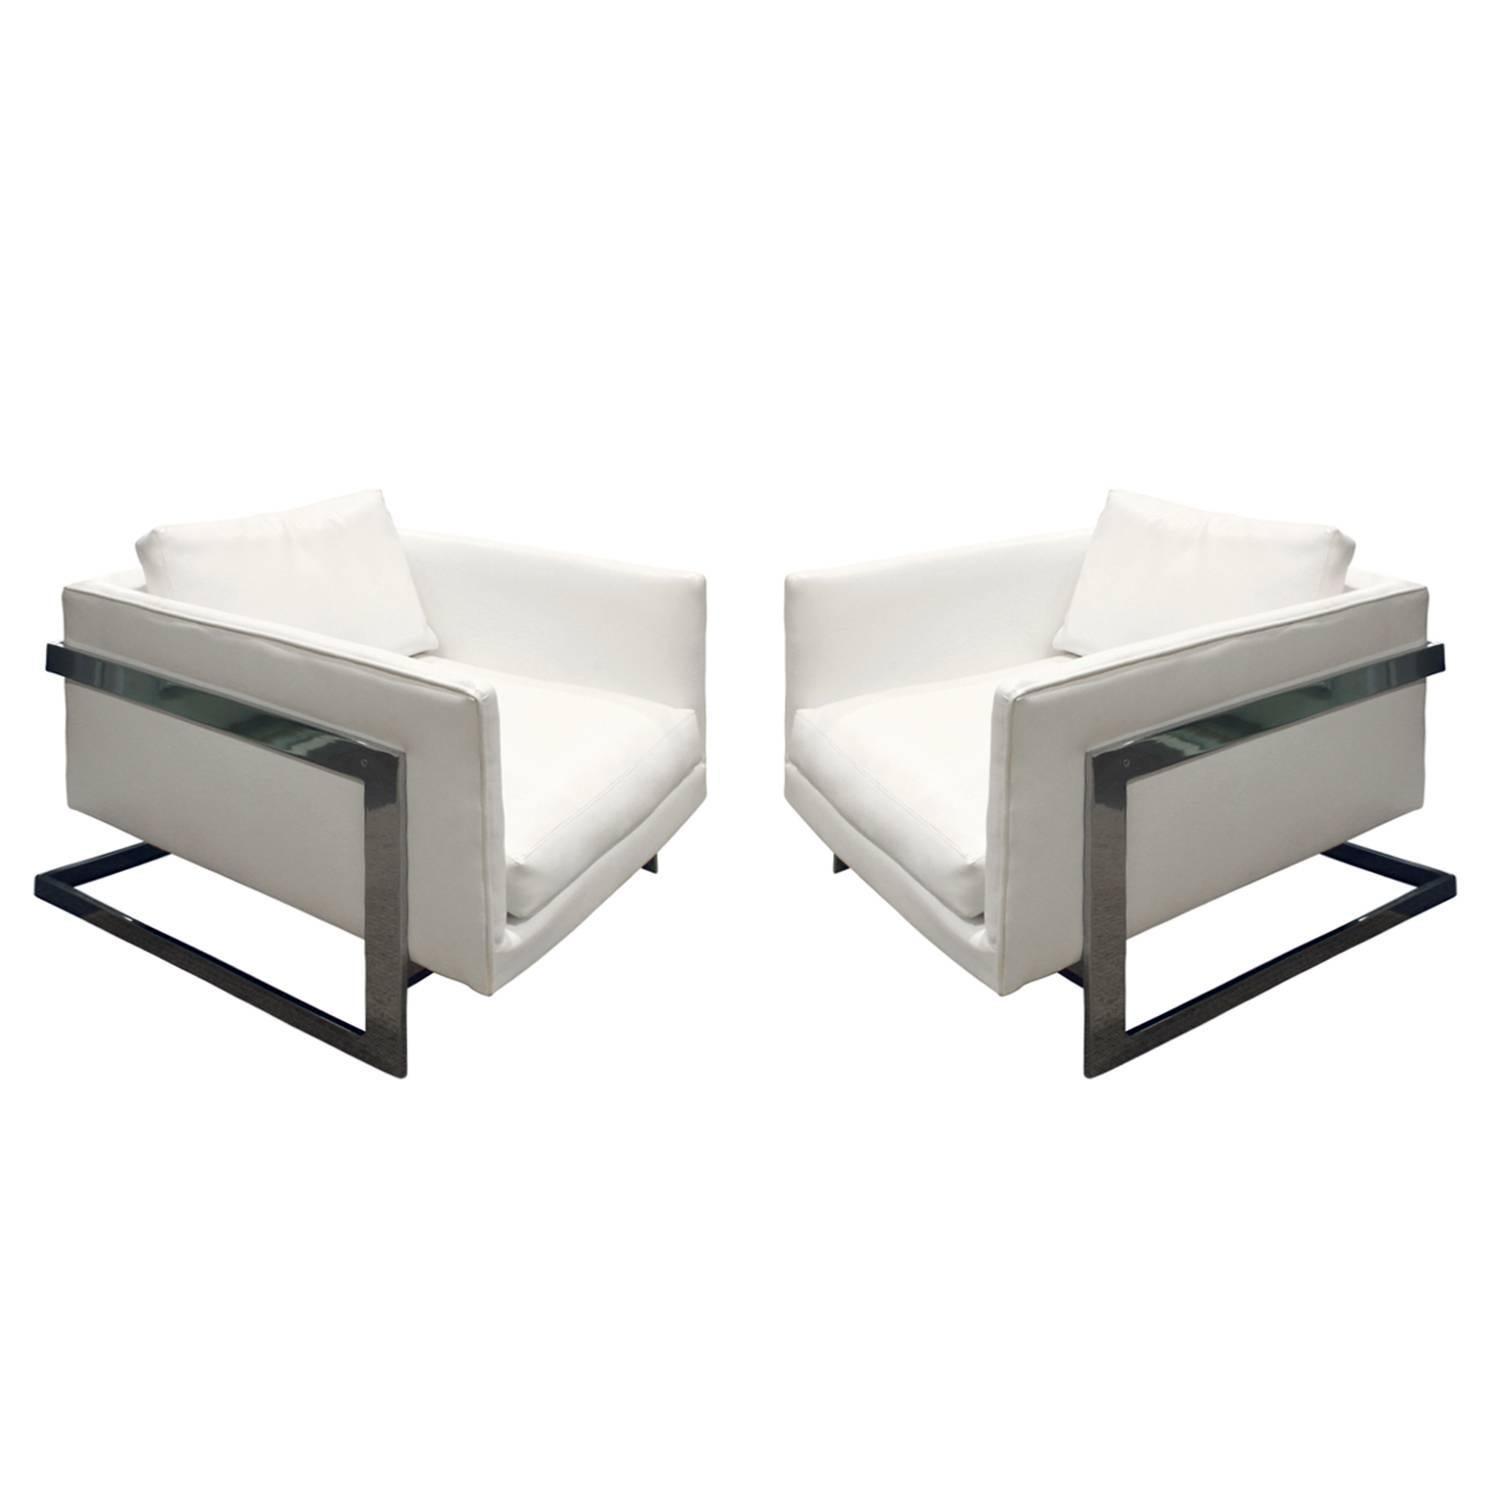 Milo Baughman Pair of Boxy Club Chairs with Polished Chrome, 1970s